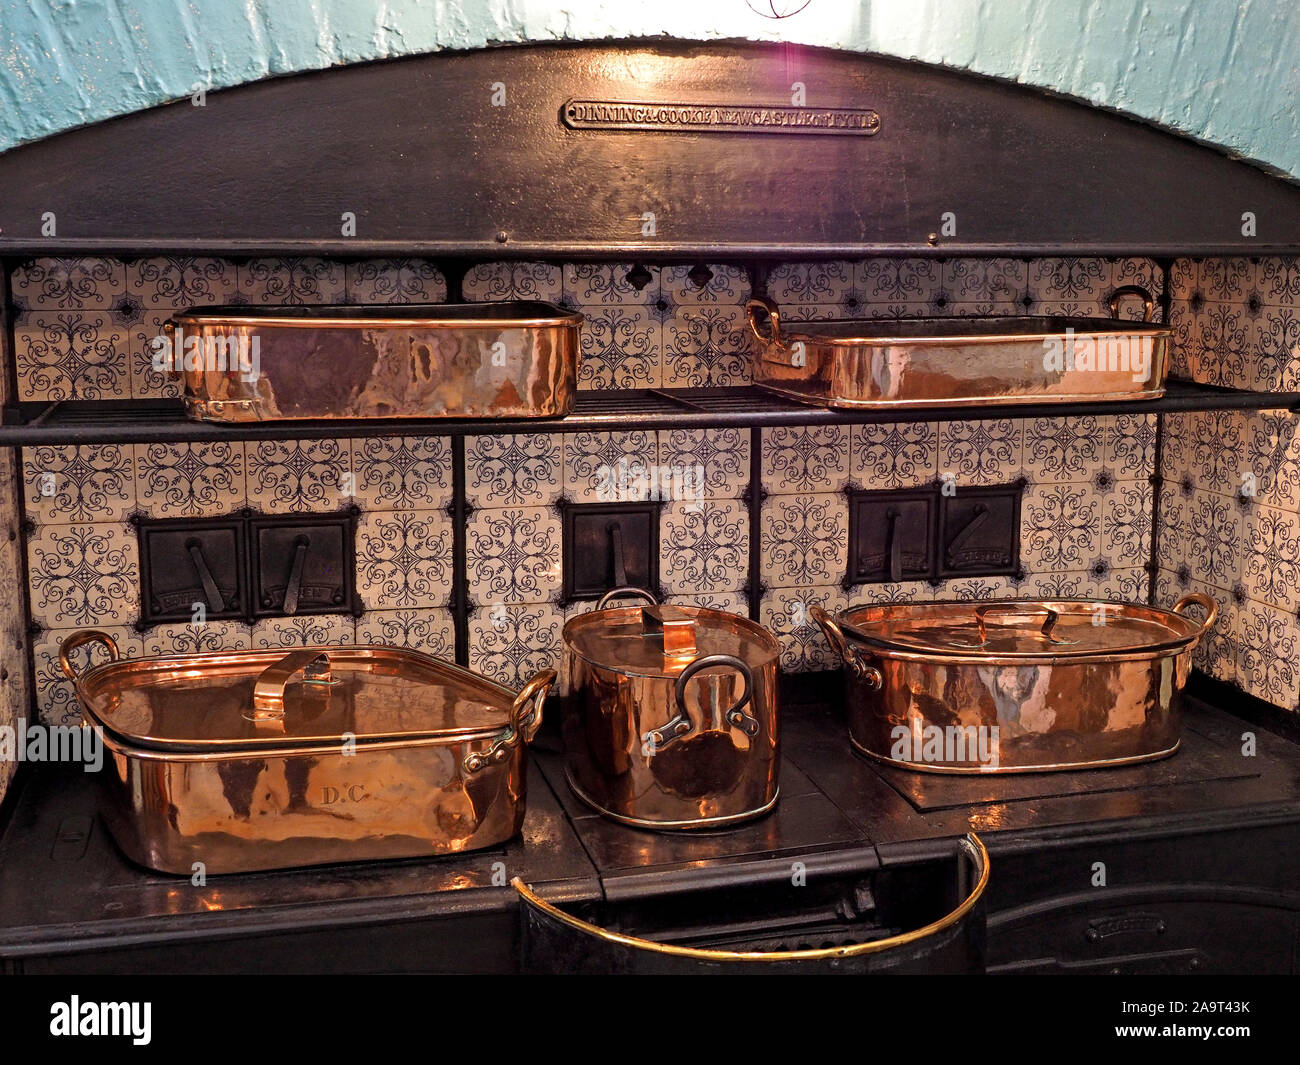 vast gleaming copper pans with lids forming part of historic display on cast iron  cooking range in kitchen of medieval castle in England, UK Stock Photo